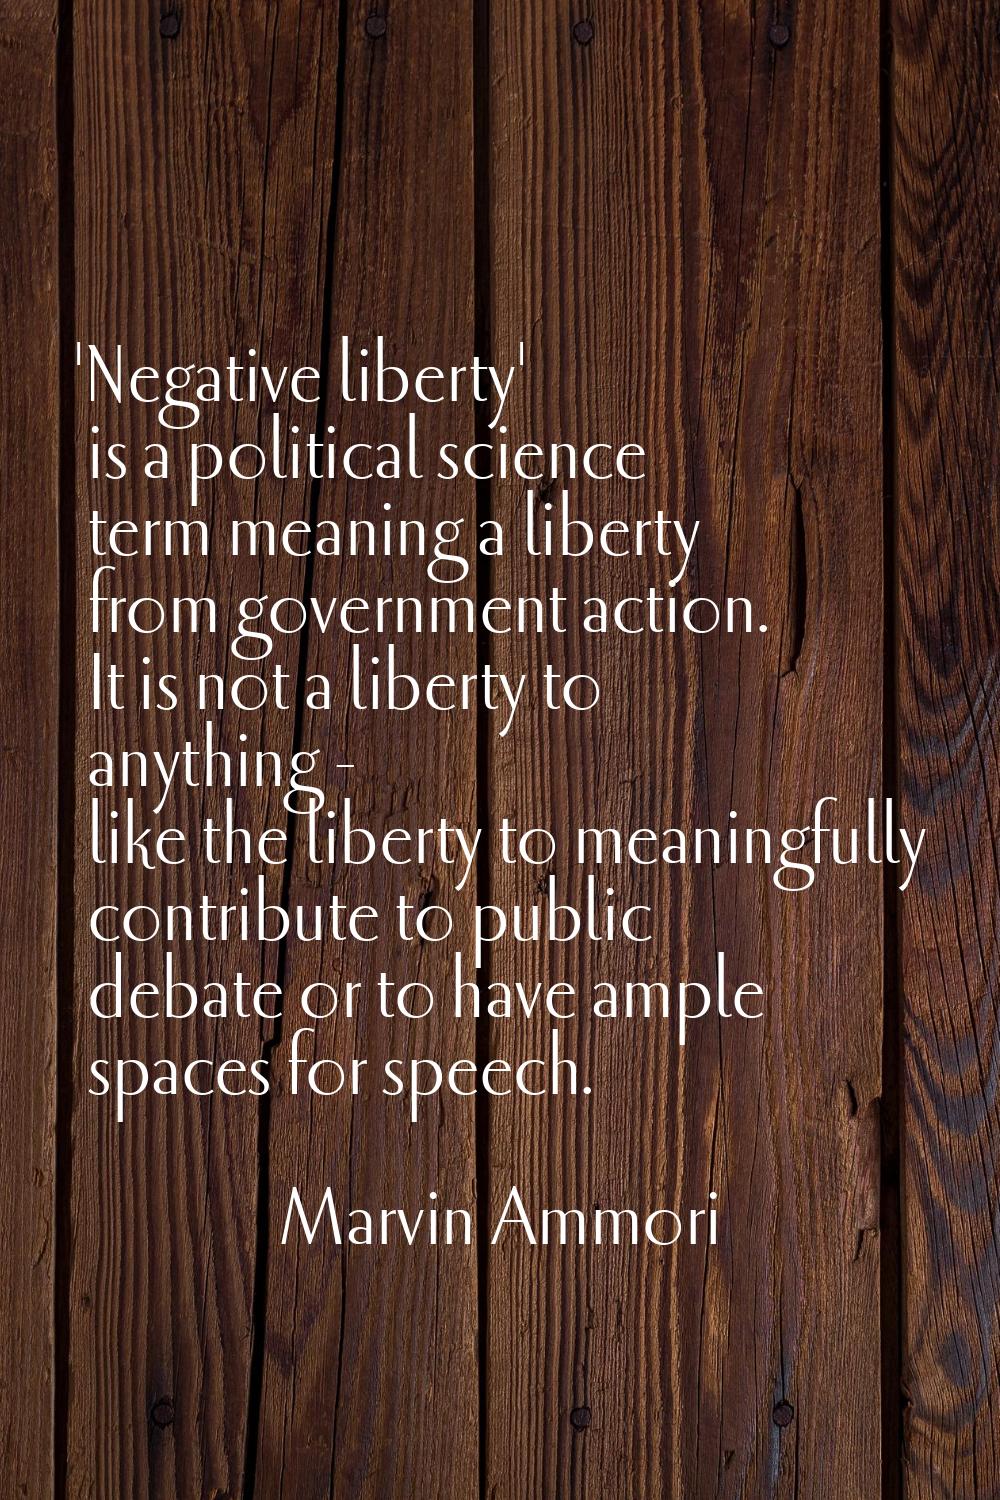 'Negative liberty' is a political science term meaning a liberty from government action. It is not 